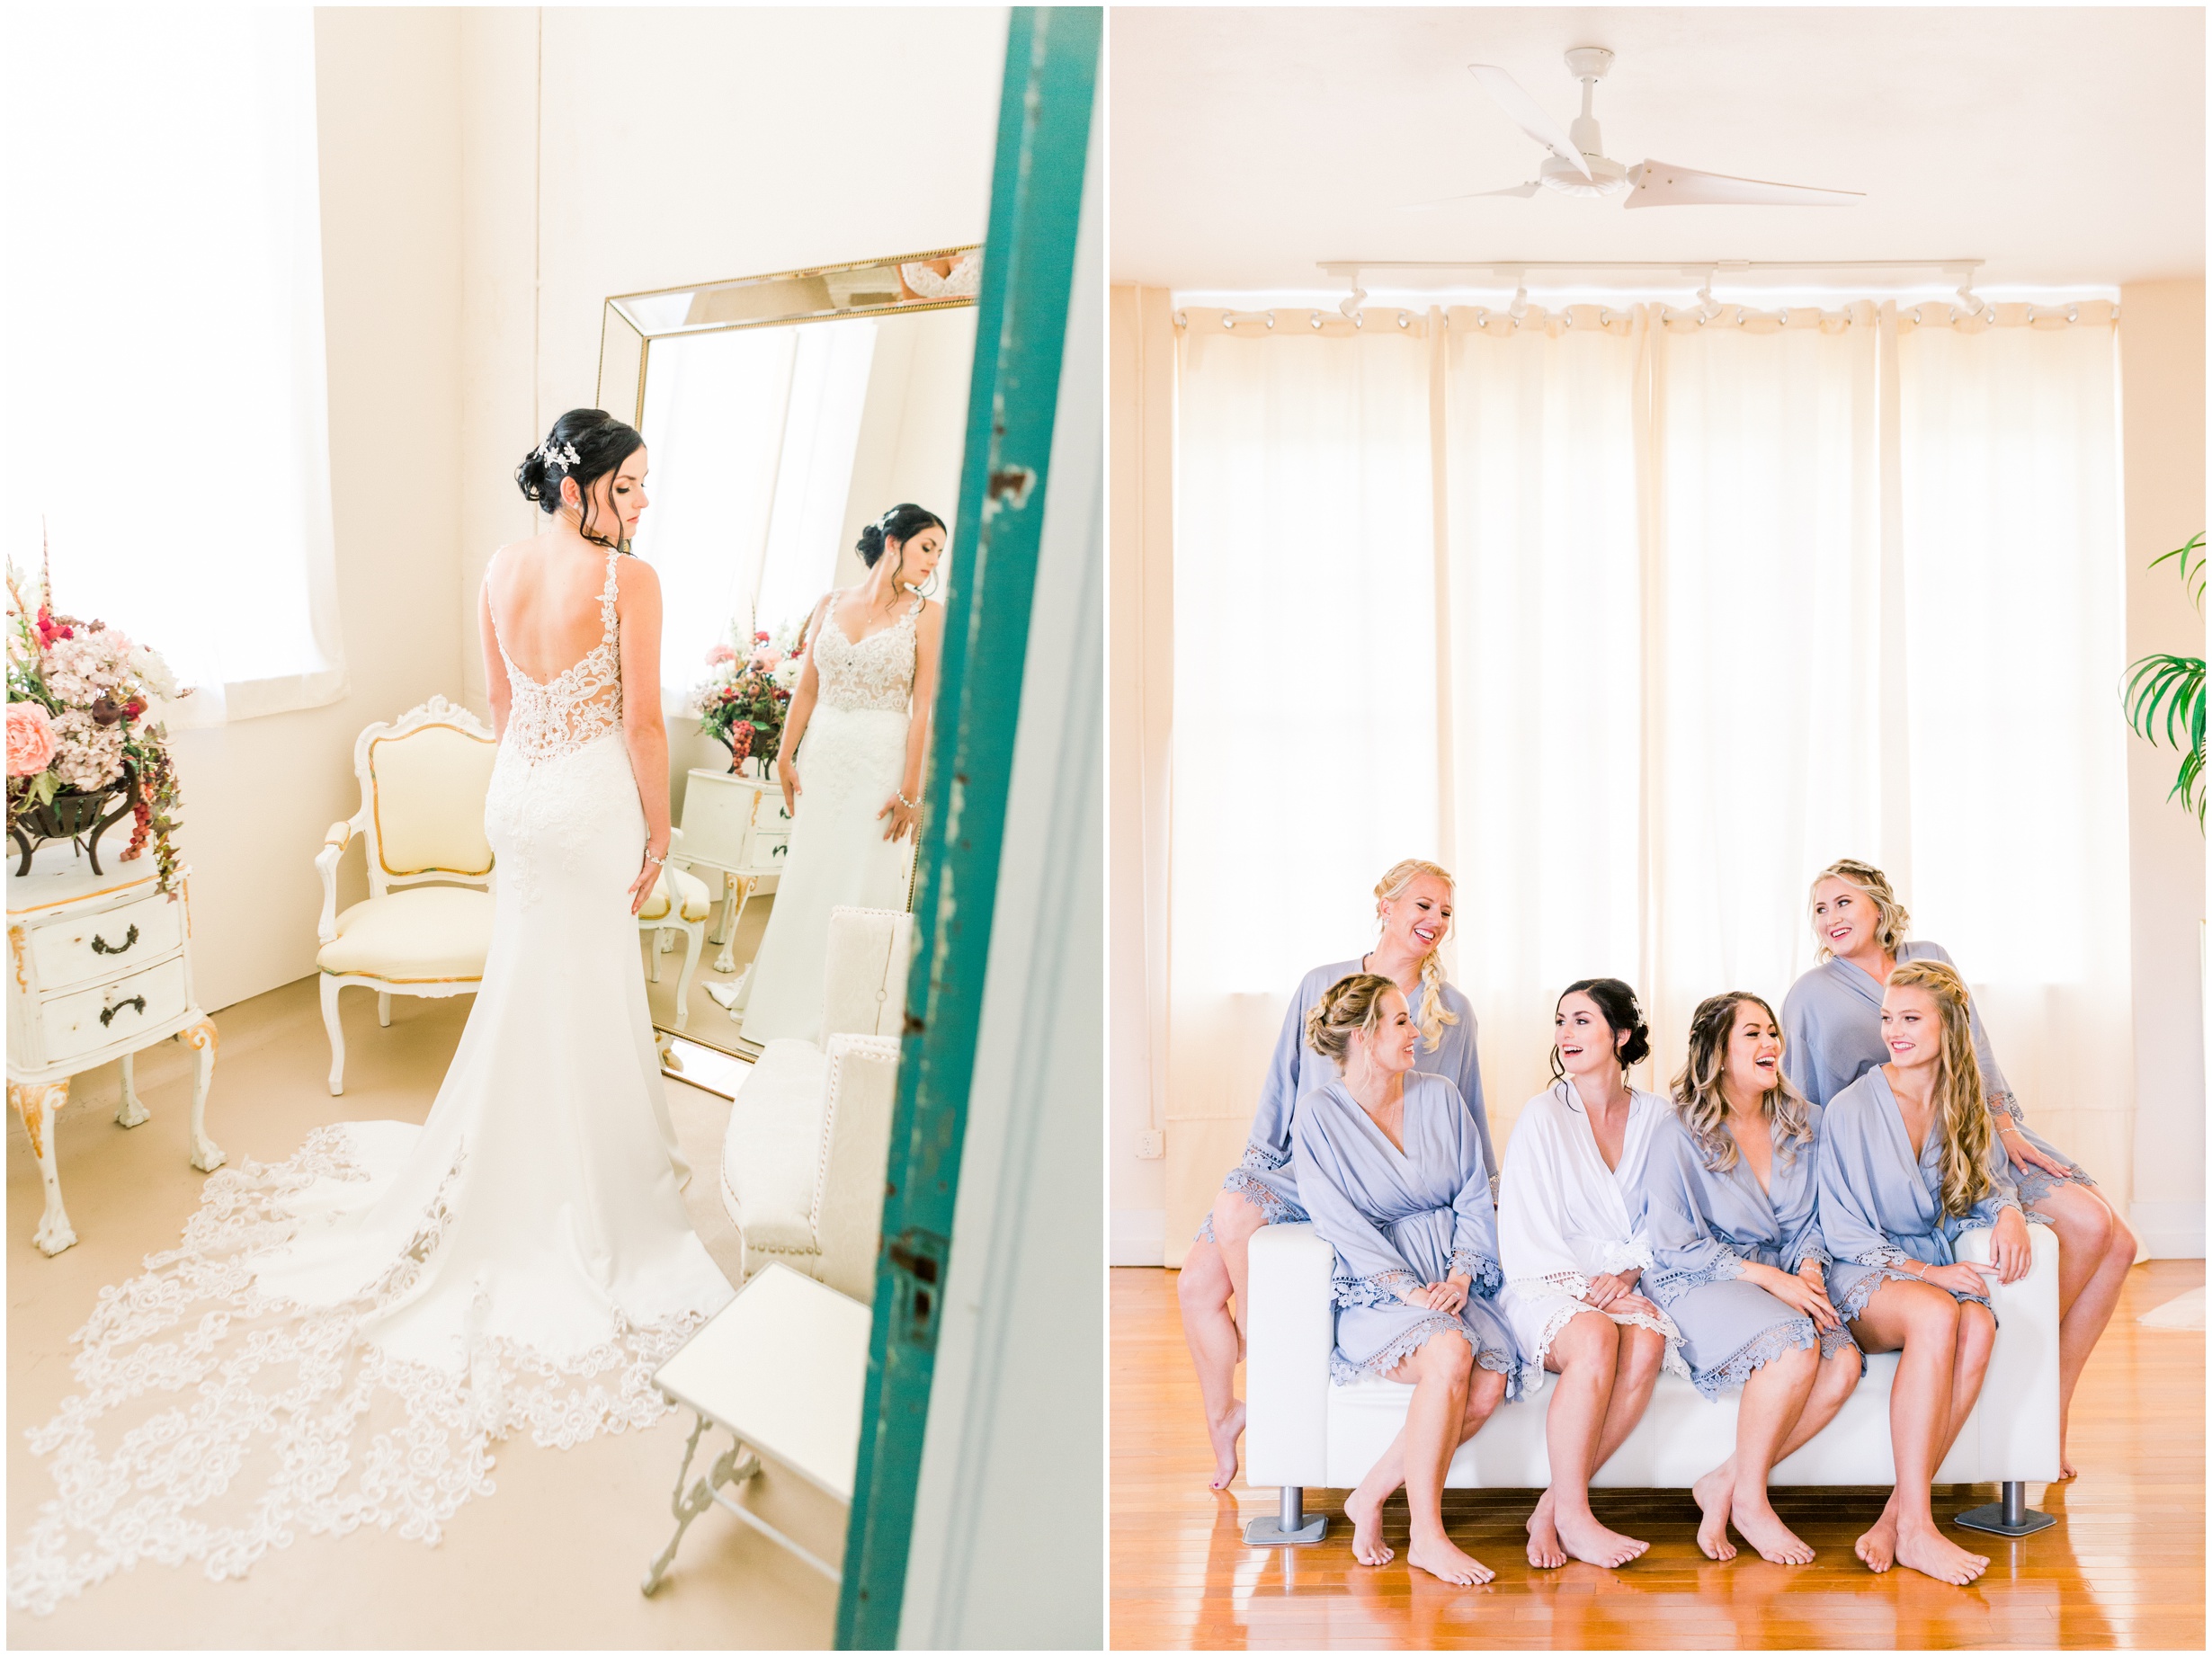 Choosing a getting ready location for your wedding day